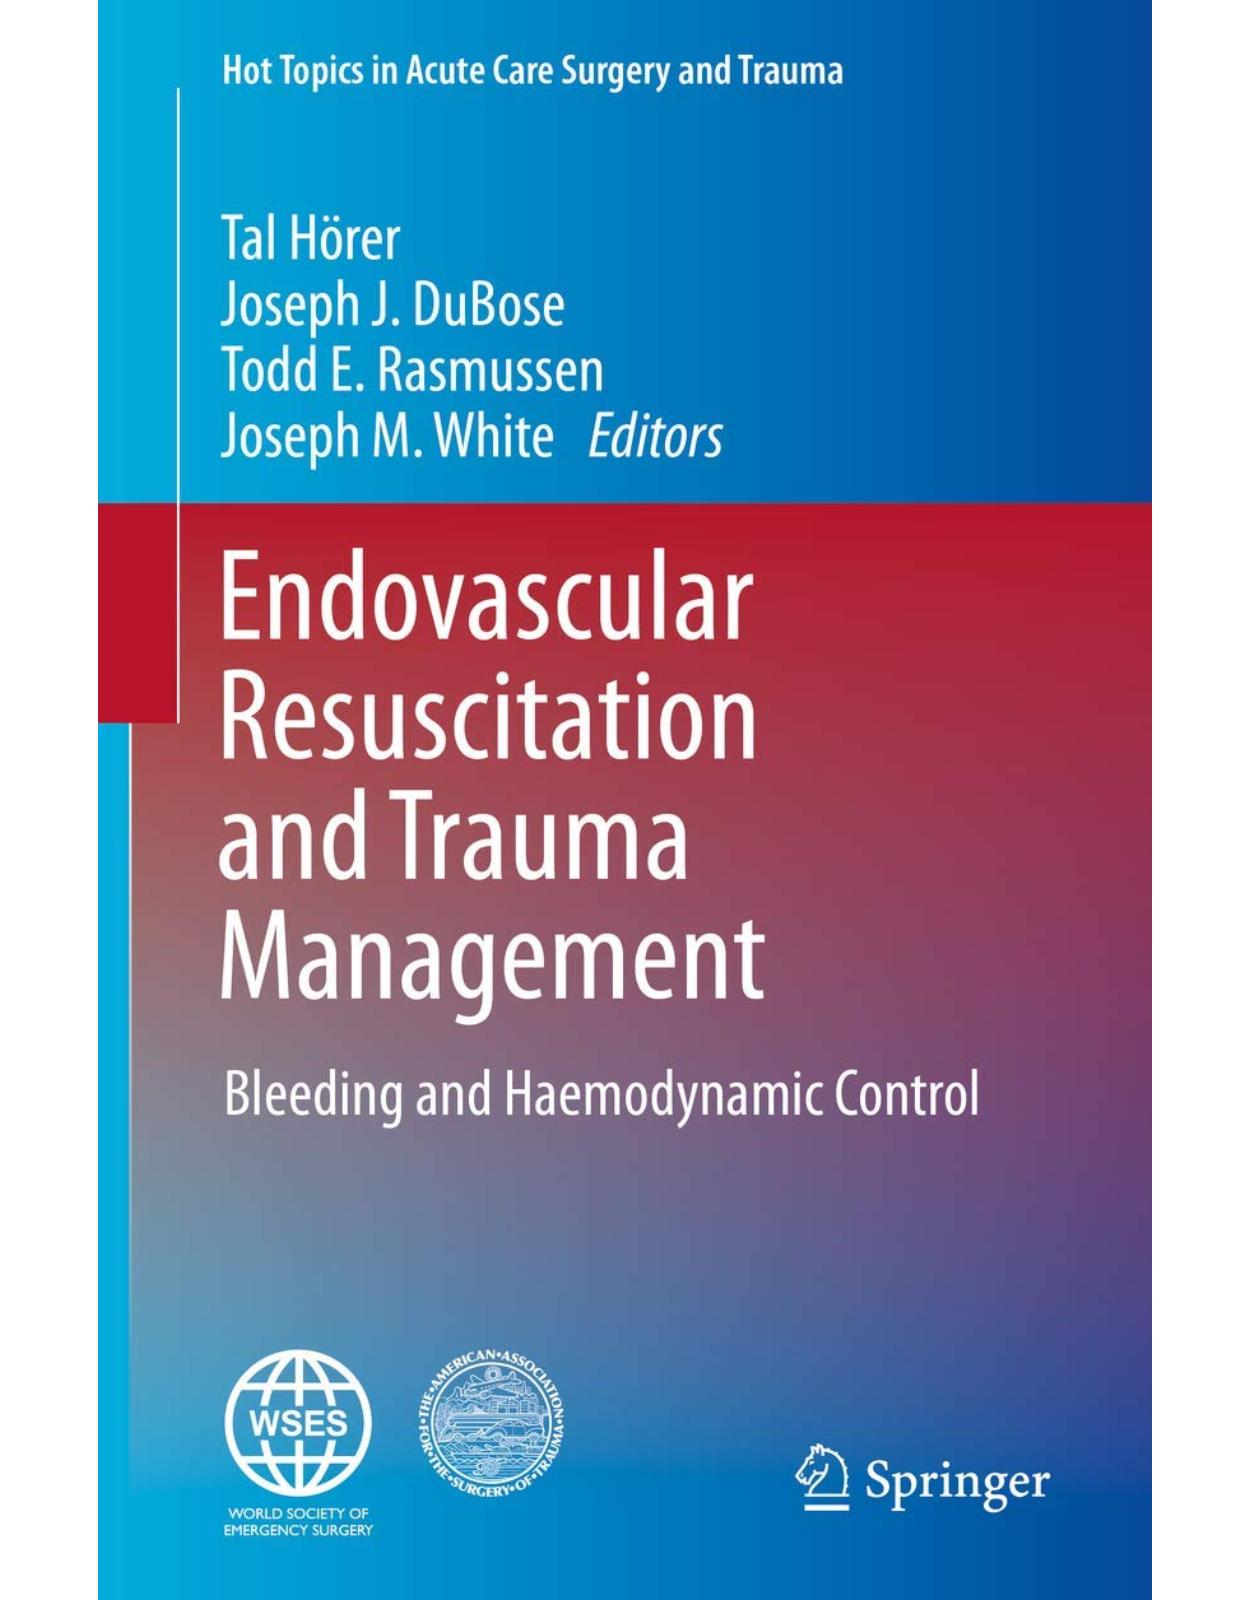 Endovascular Resuscitation and Trauma Management: Bleeding and Haemodynamic Control (Hot Topics in Acute Care Surgery and Trauma) 